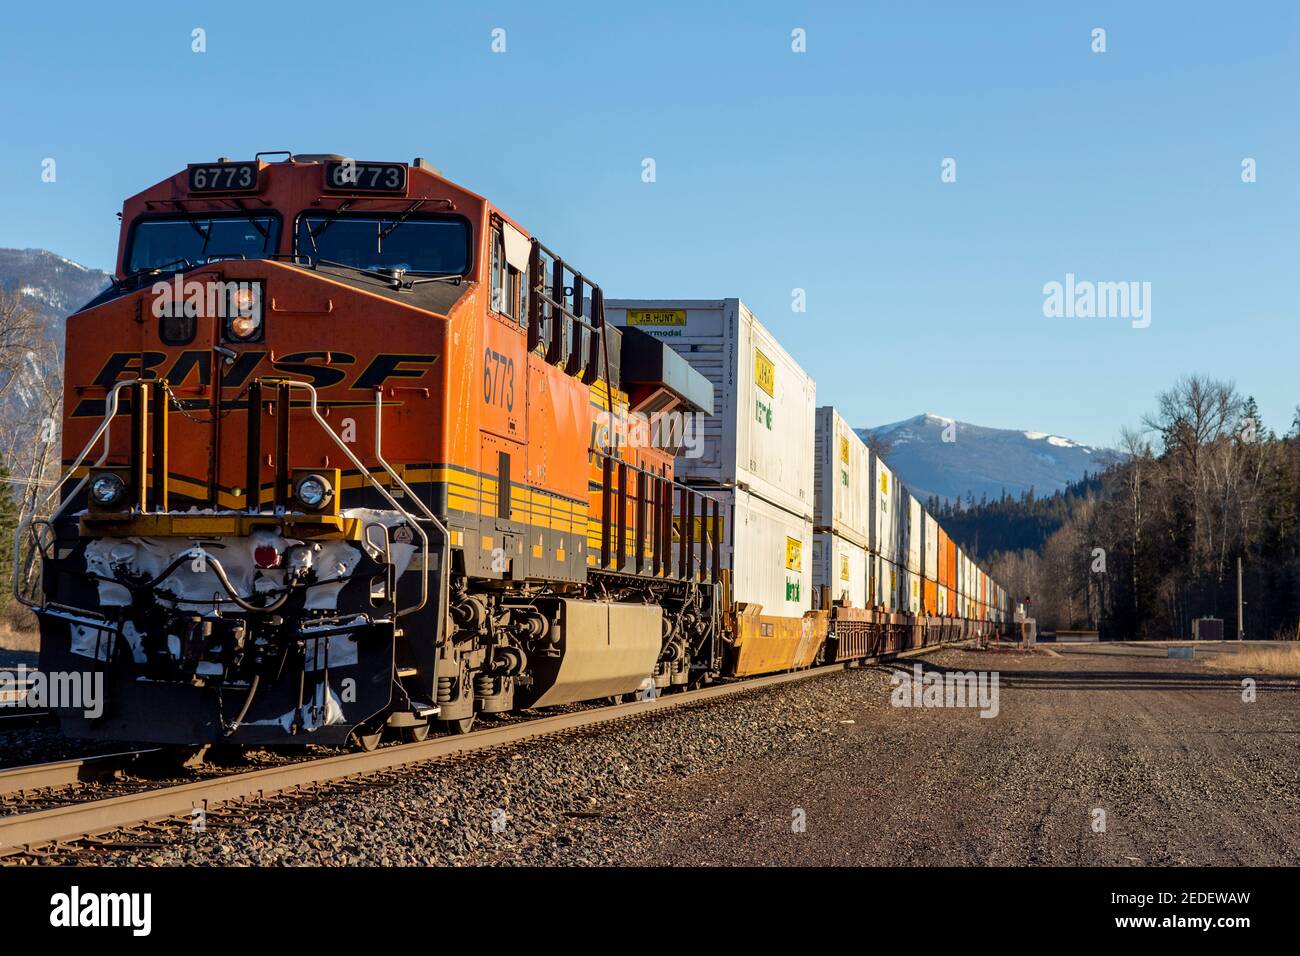 A trailing push locomotive, 6773, of a BNSF intermodal shipping container freight train coming down the tracks in the town of Troy, Montana. Stock Photo